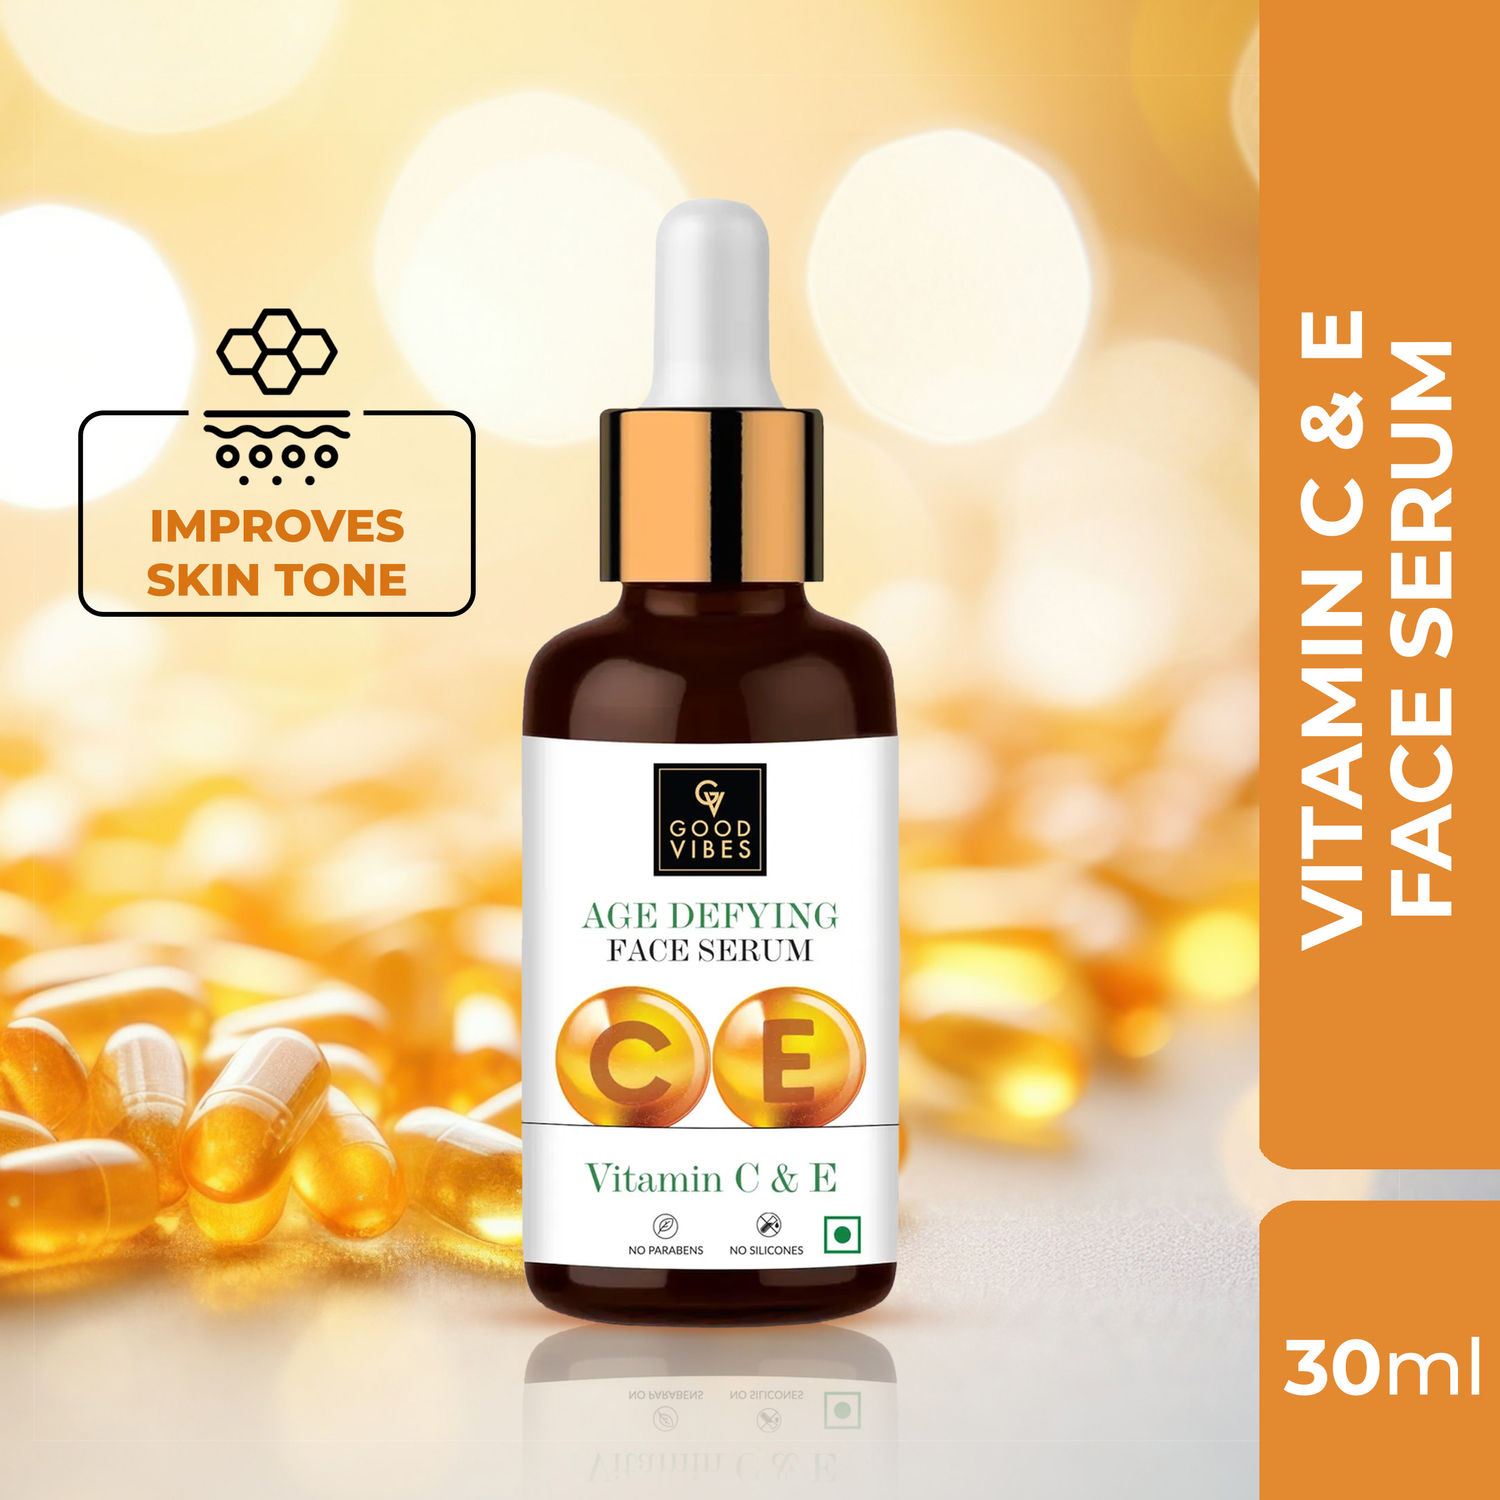 Buy Good Vibes Vitamin C & E Age Defying Serum | Reduces Wrinkles, Lighten Scars | No Parabens, No Sulphates, No Mineral Oil, No Animal Testing (30 ml) - Purplle